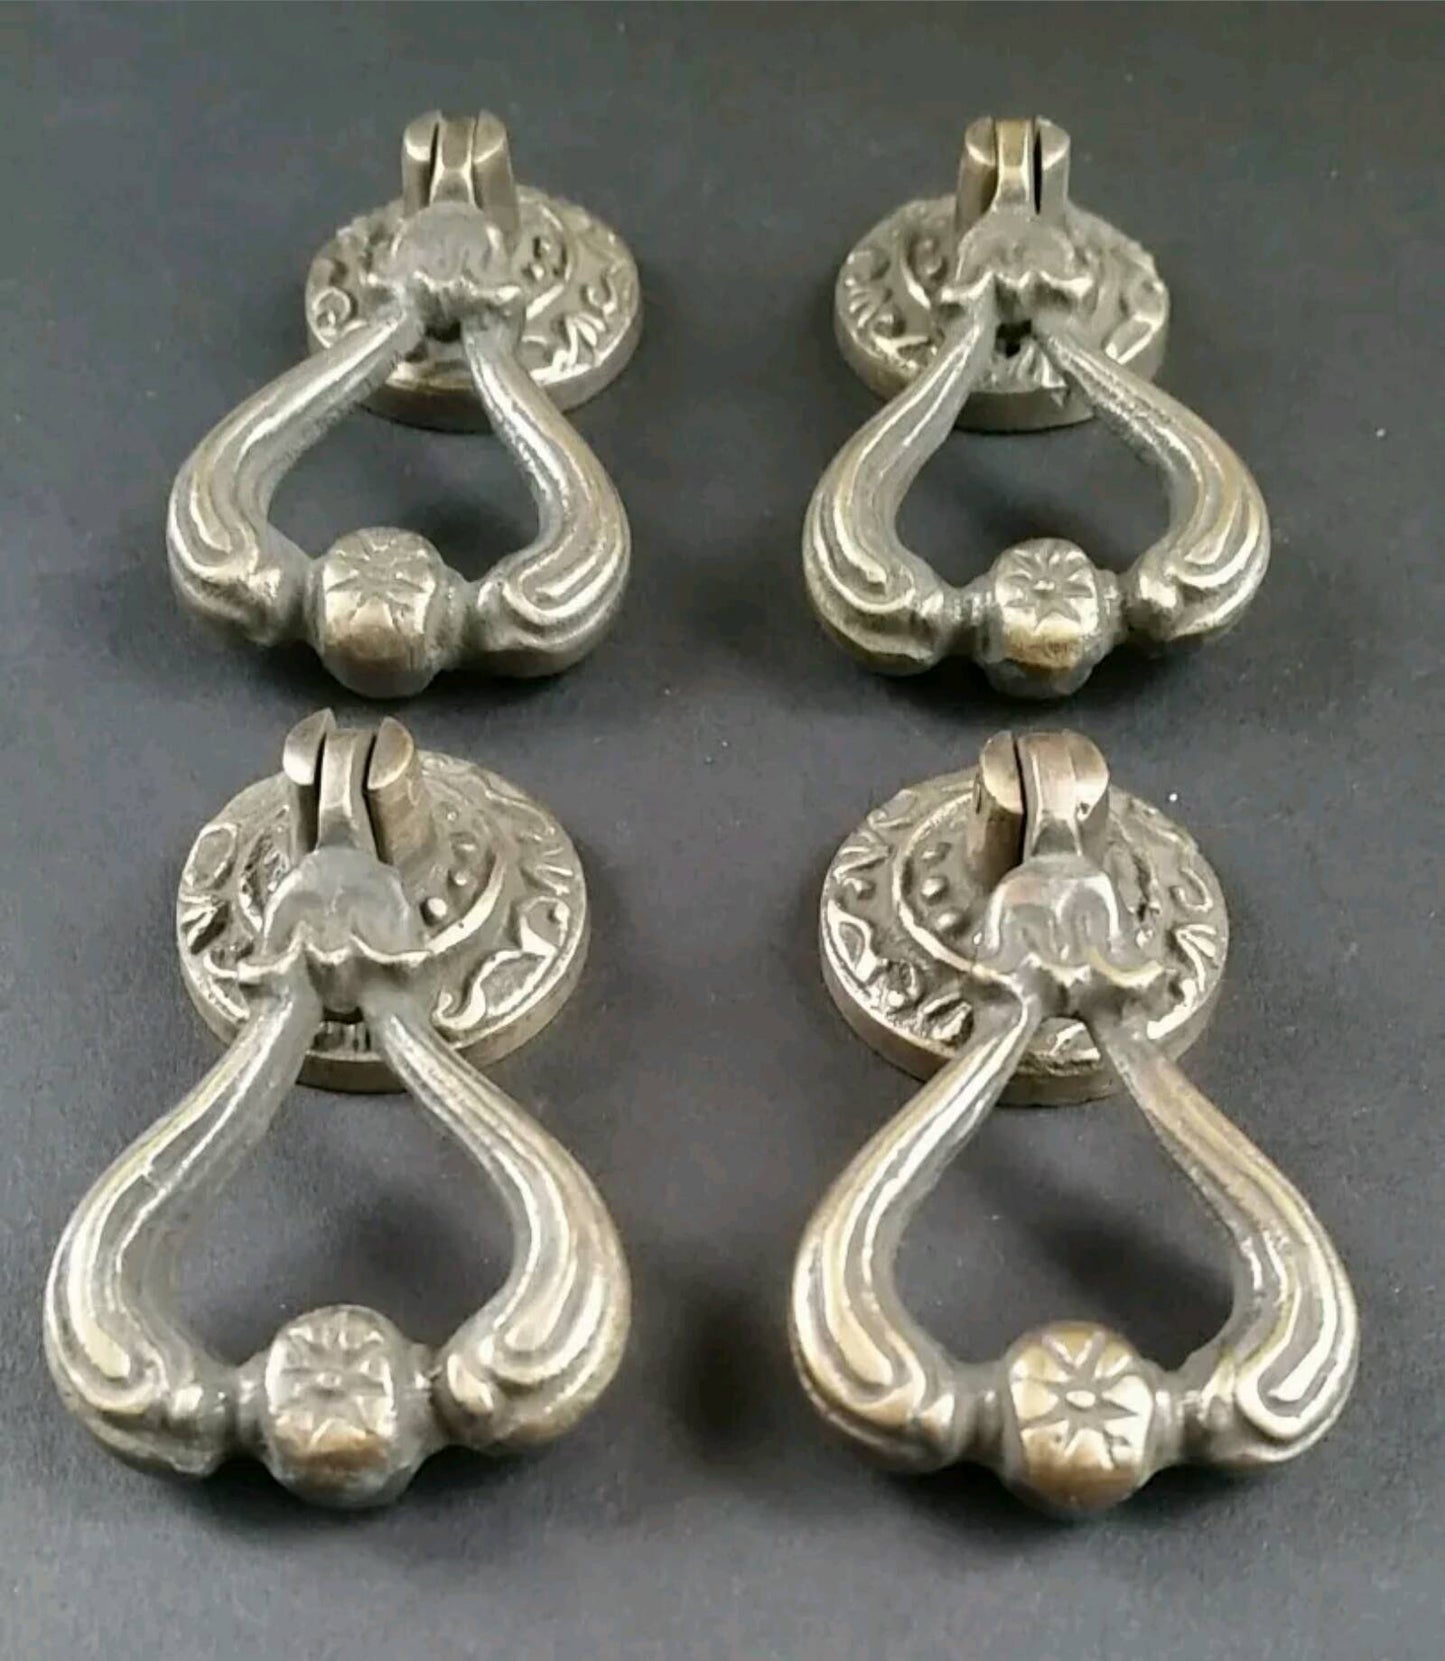 4 Ornate Brass Handles Pulls w Detailed Drop Ring Victorian, French Antique Vintage Style#H11